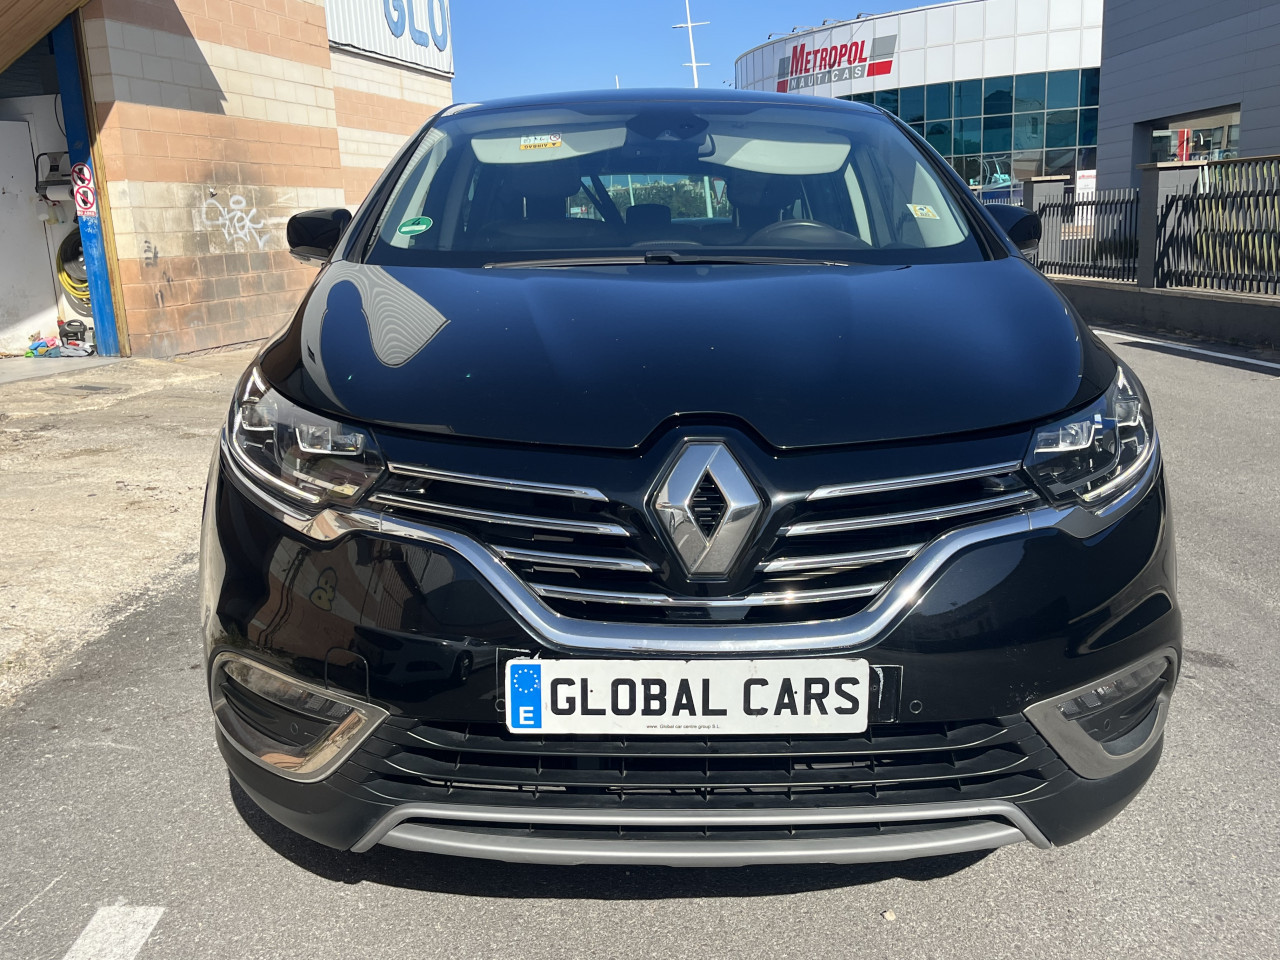 Renault Espace 1.6 Dci Intens Automatic People carrier 2016 